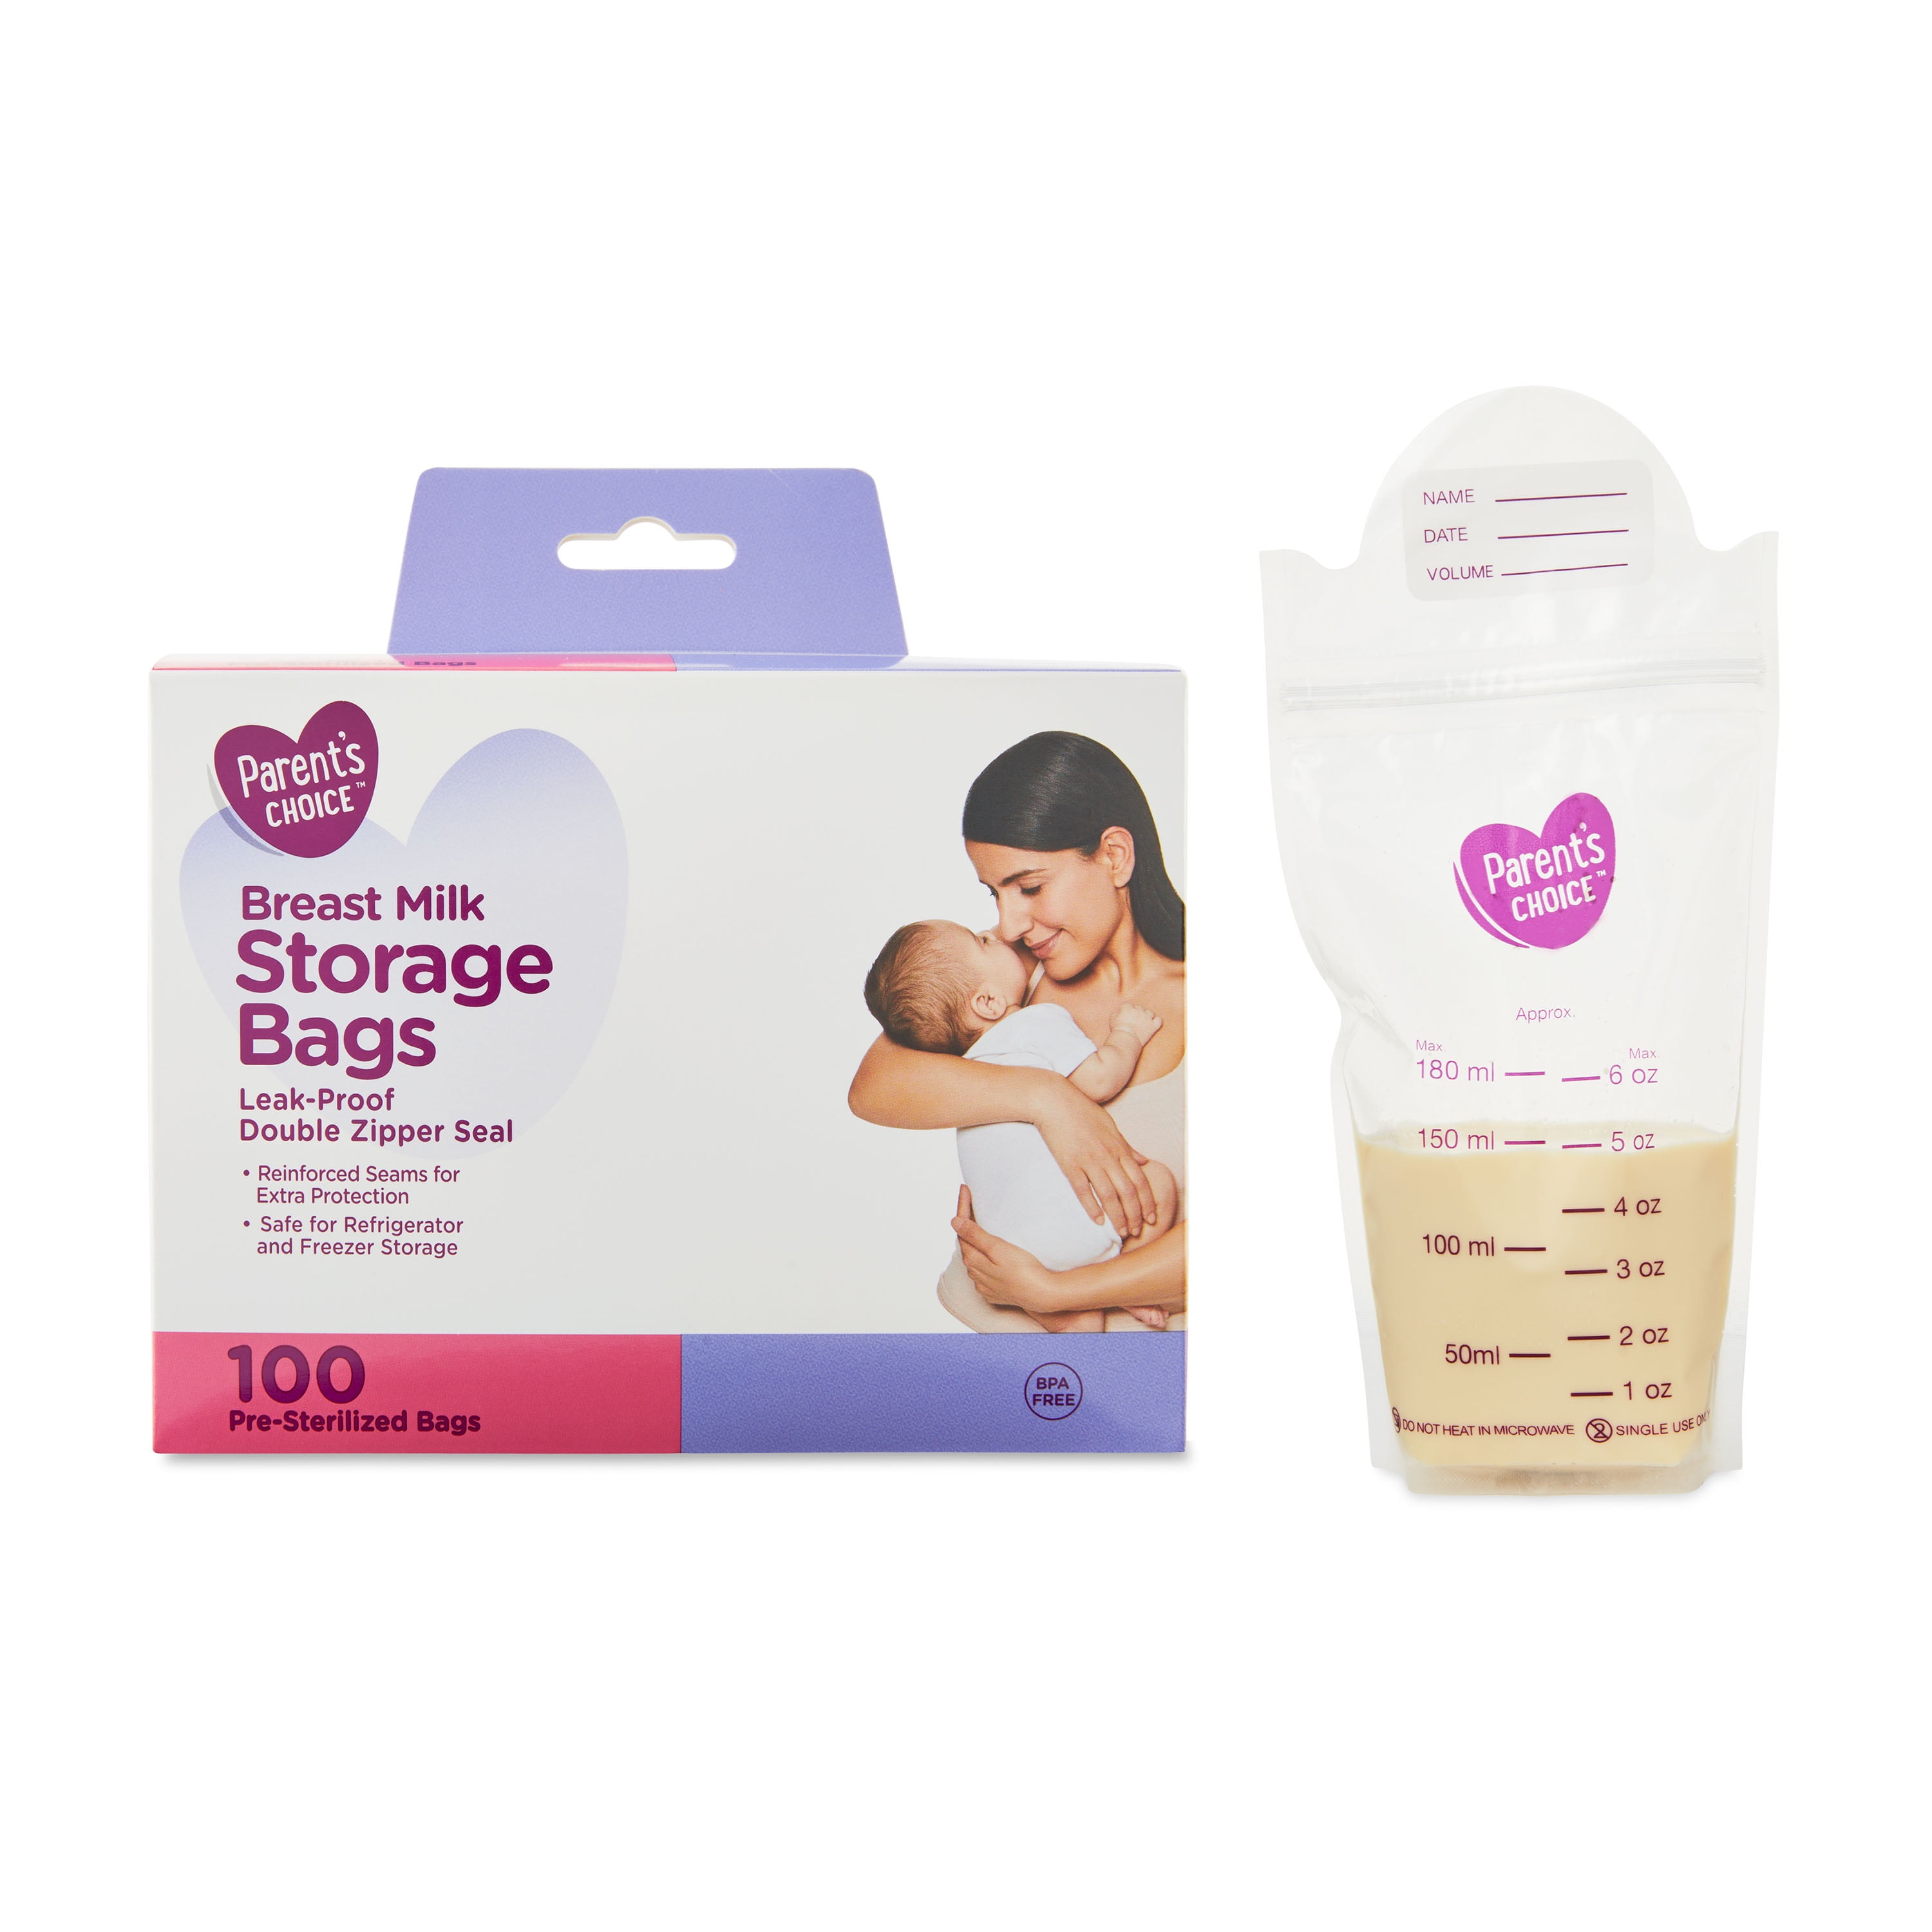 Buy Breastmilk Storage Bags 8 Oz 250 ml 110 Count Breastfeeding Freezer  Storage Container Bags for Breast Milk comes Pre Sterilized  BPA Free with  Accurate Measurements  Leak Proof Buy Now